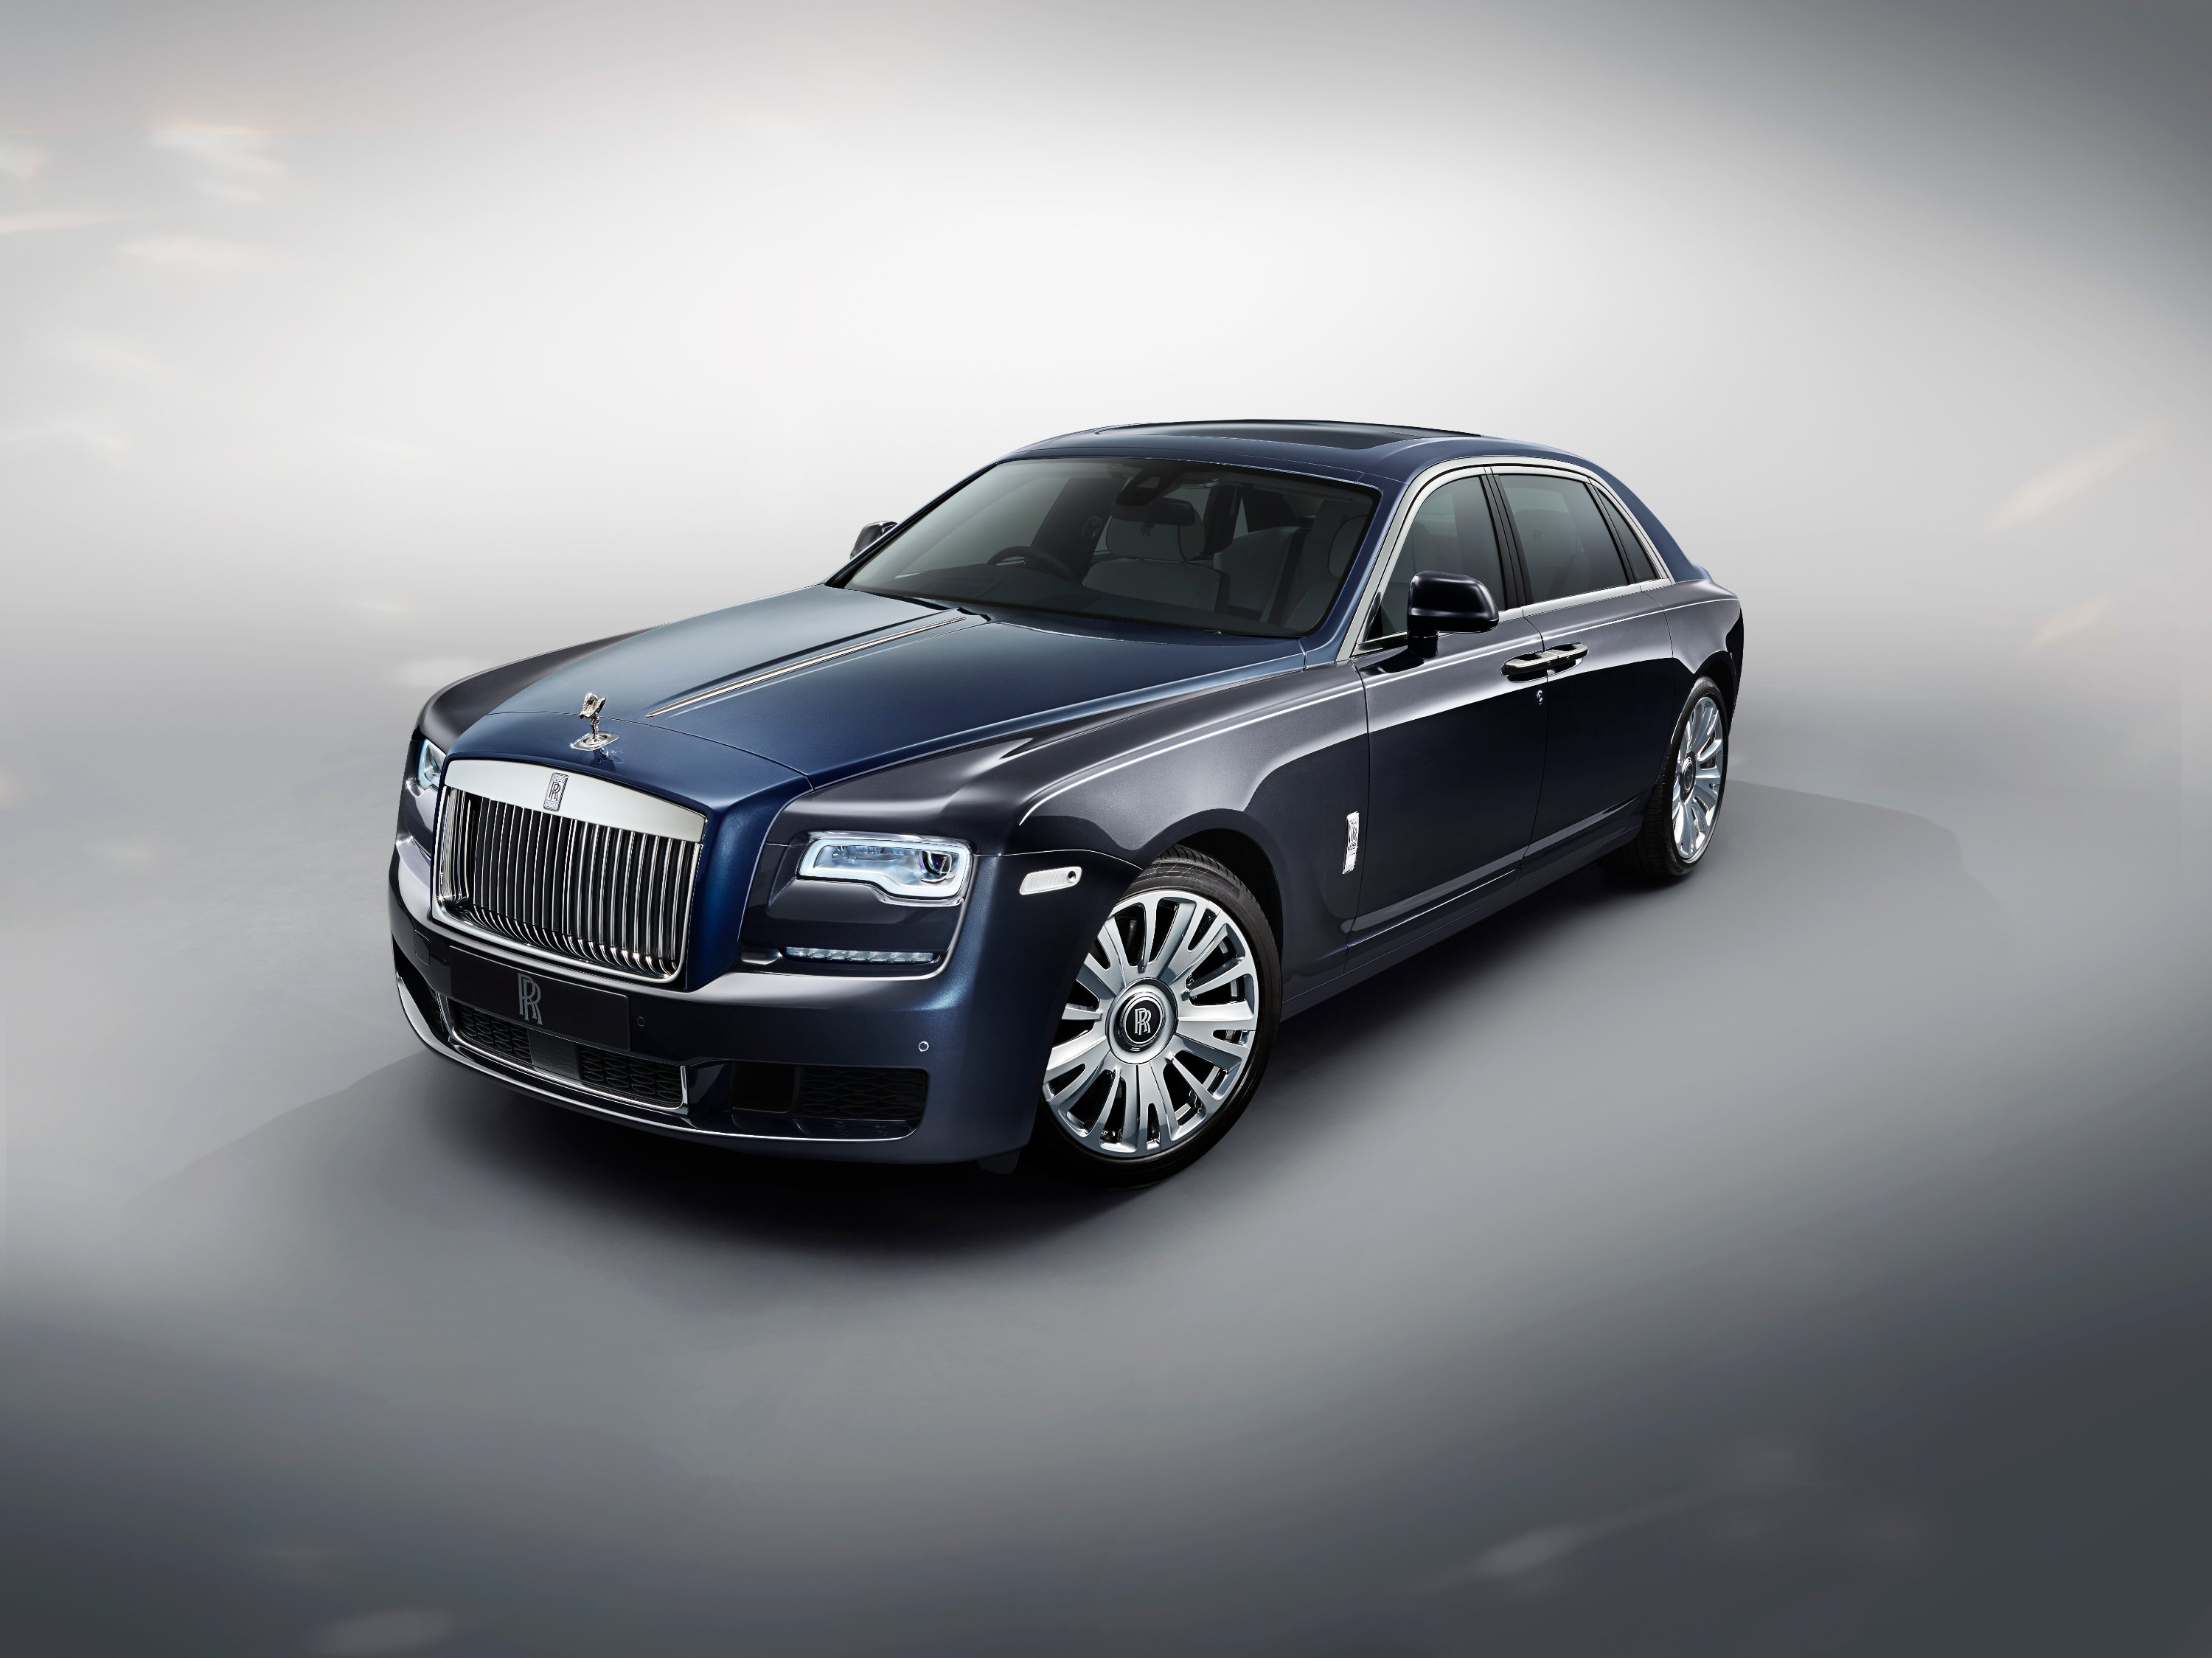 Rolls-royce Ghost Extended Wheelbase Awarded Best Super-luxury Car By What Car? Magazine